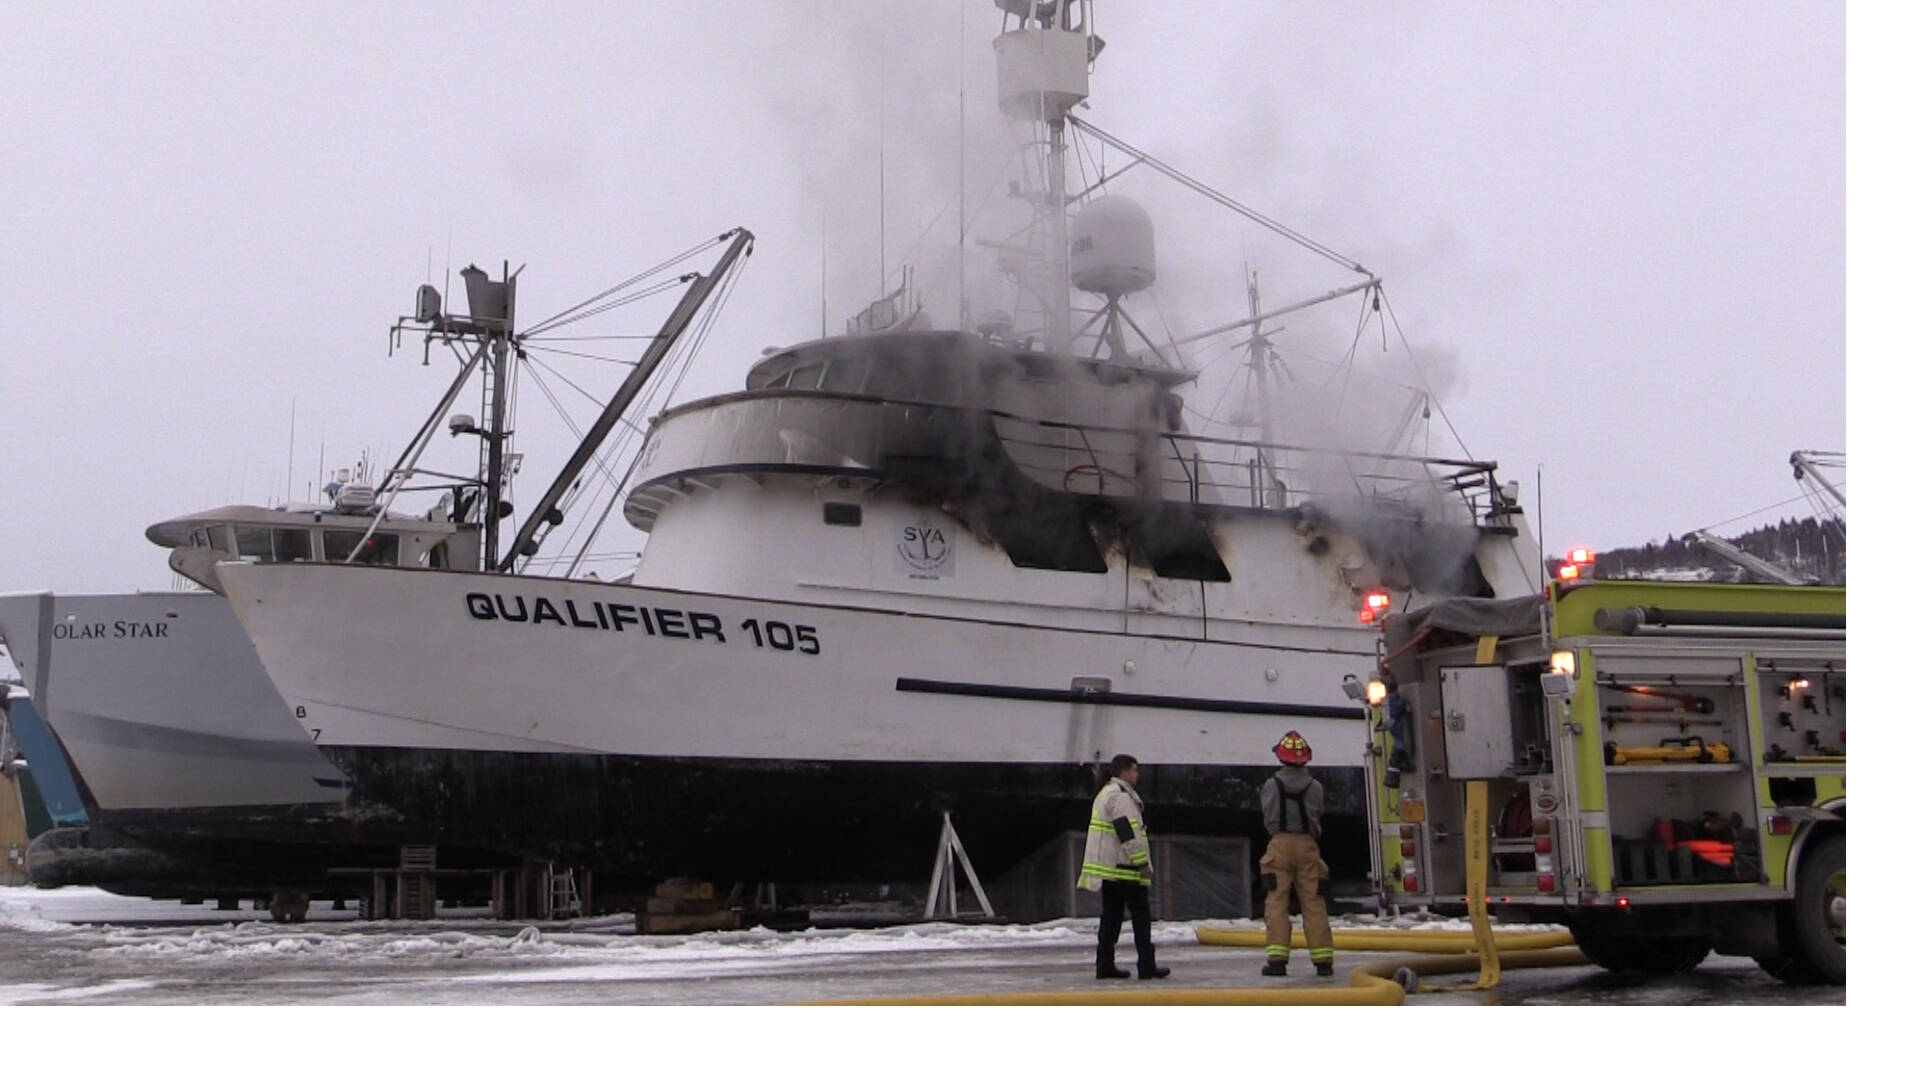 Photos by Nika Wolfe
Emergency personnel respond to a fire on R/V Qualifier, in the Northern Enterprises Boatyard on Kachemak Drive, Jan. 19.